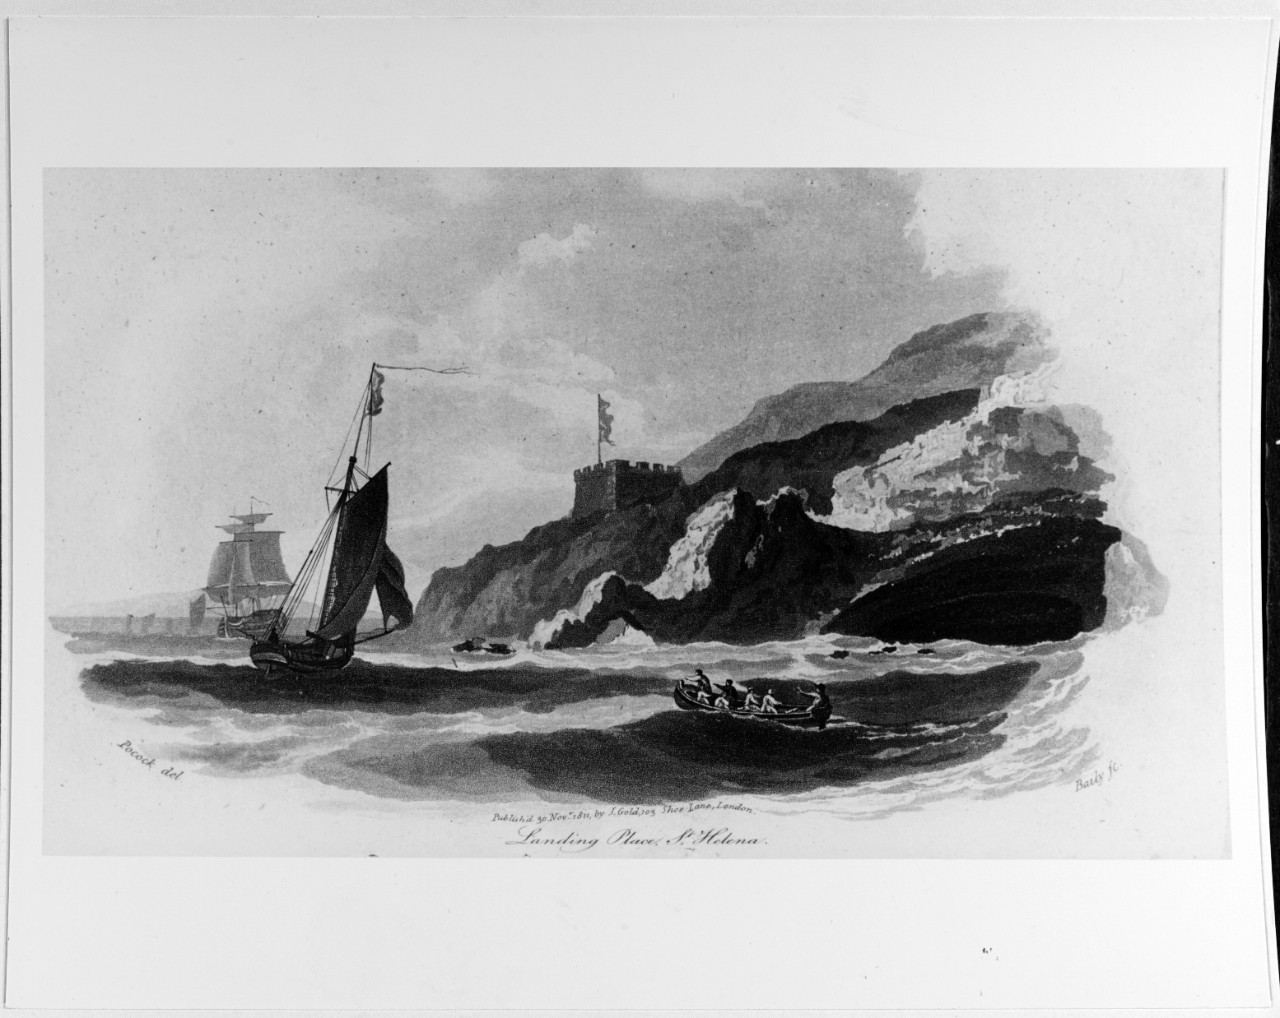 "Landing Place, St. Helena," in the South Atlantic. 